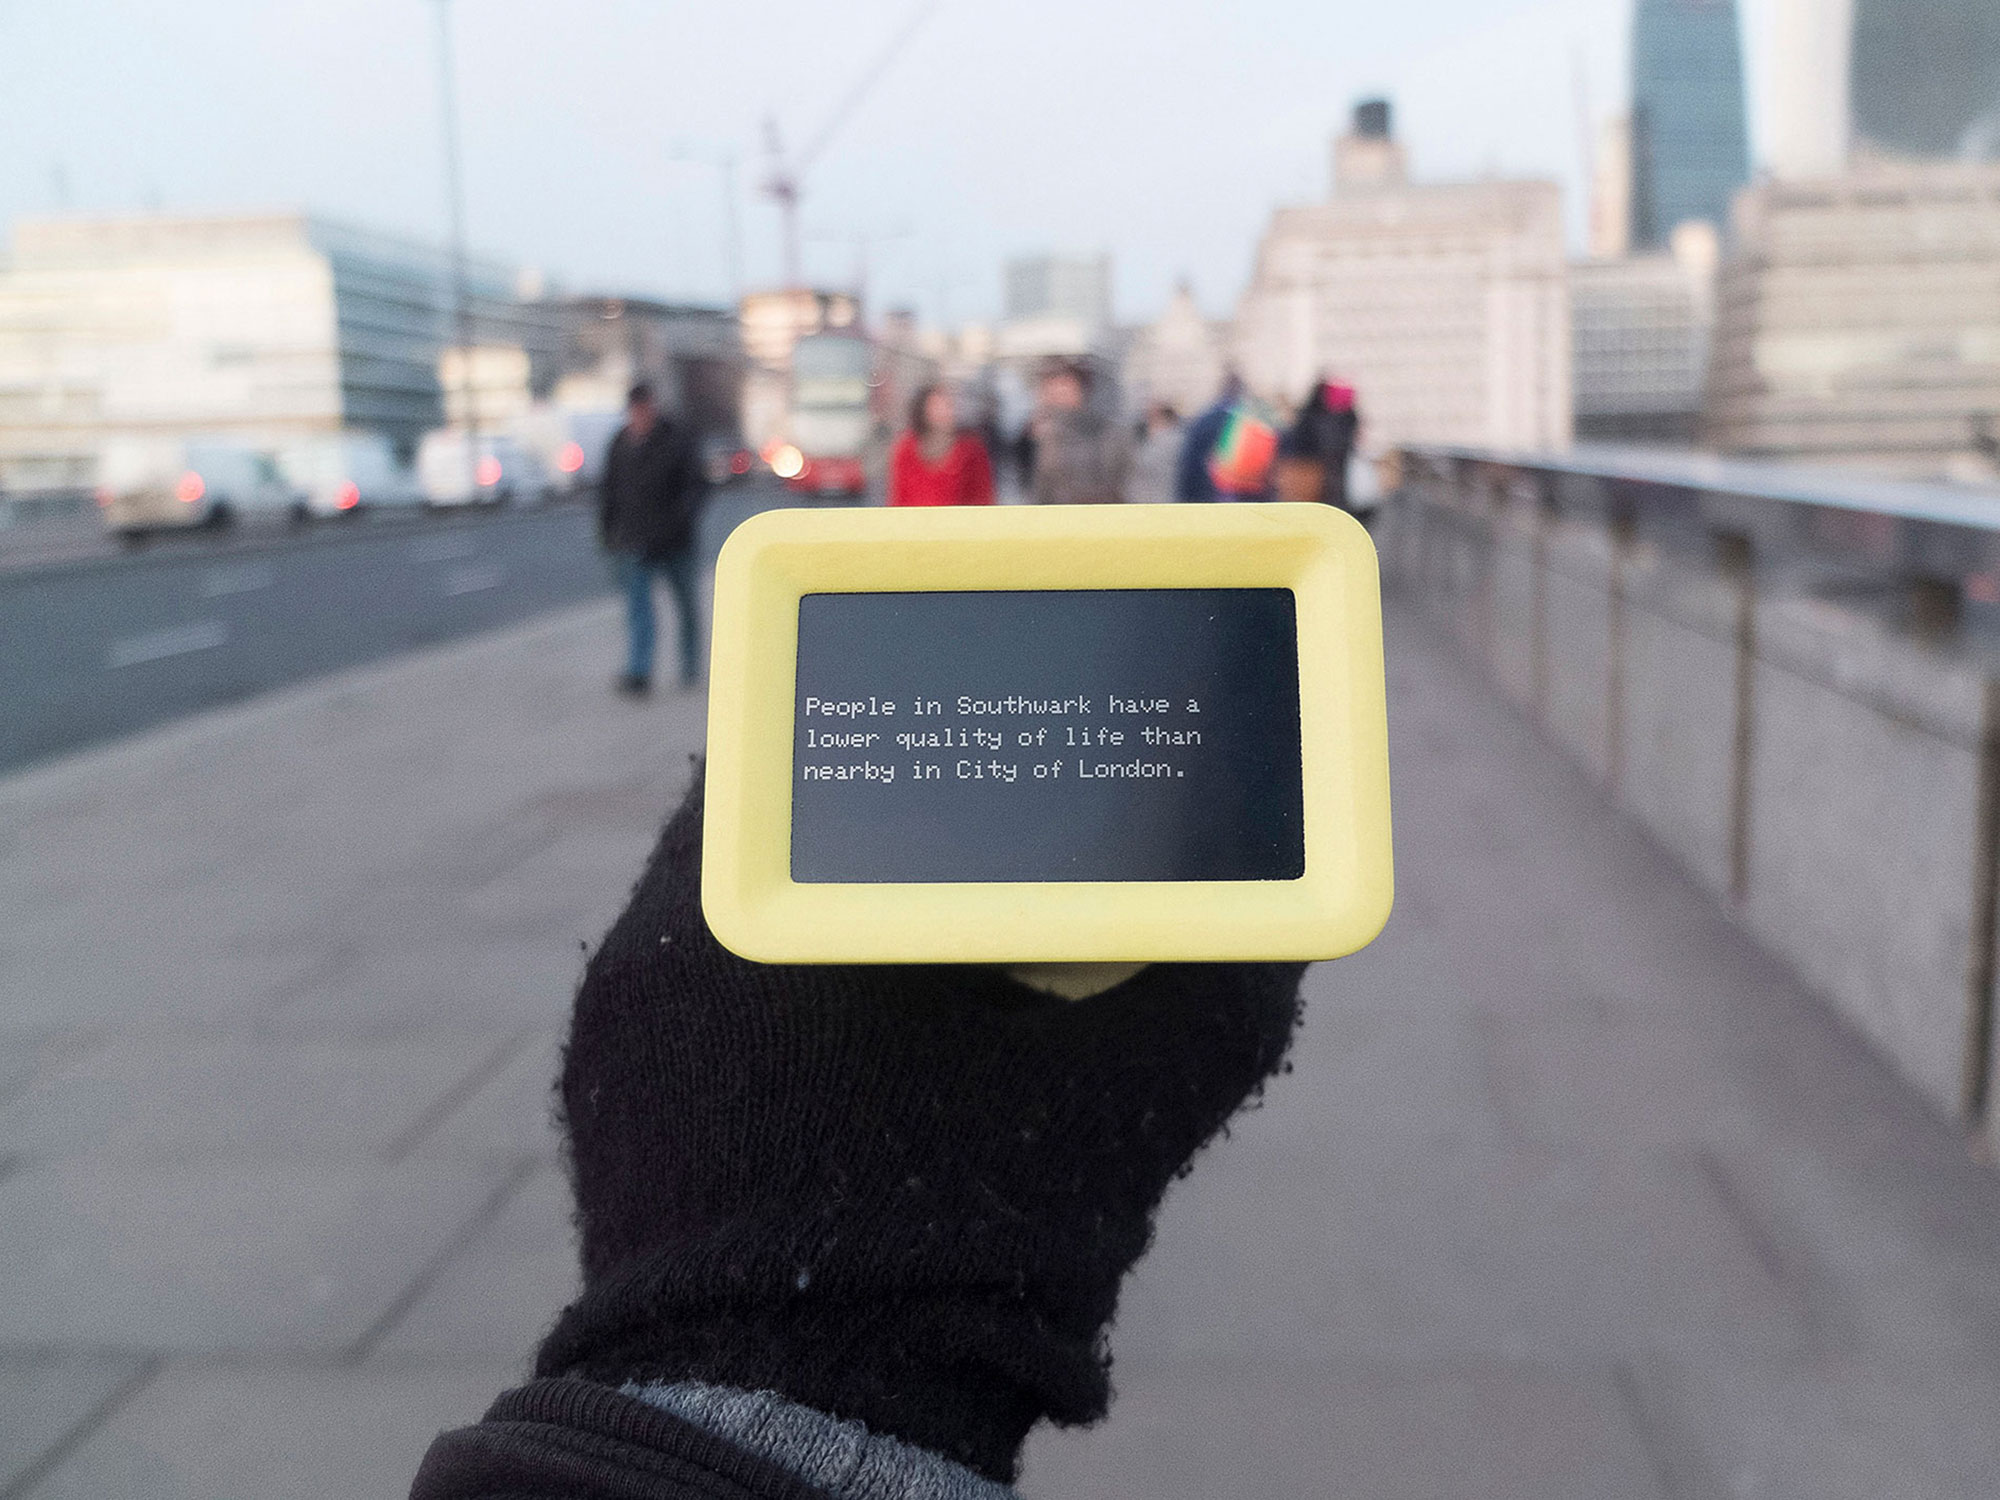 A photograph of the Datacatcher device being viewed on a bridge in London